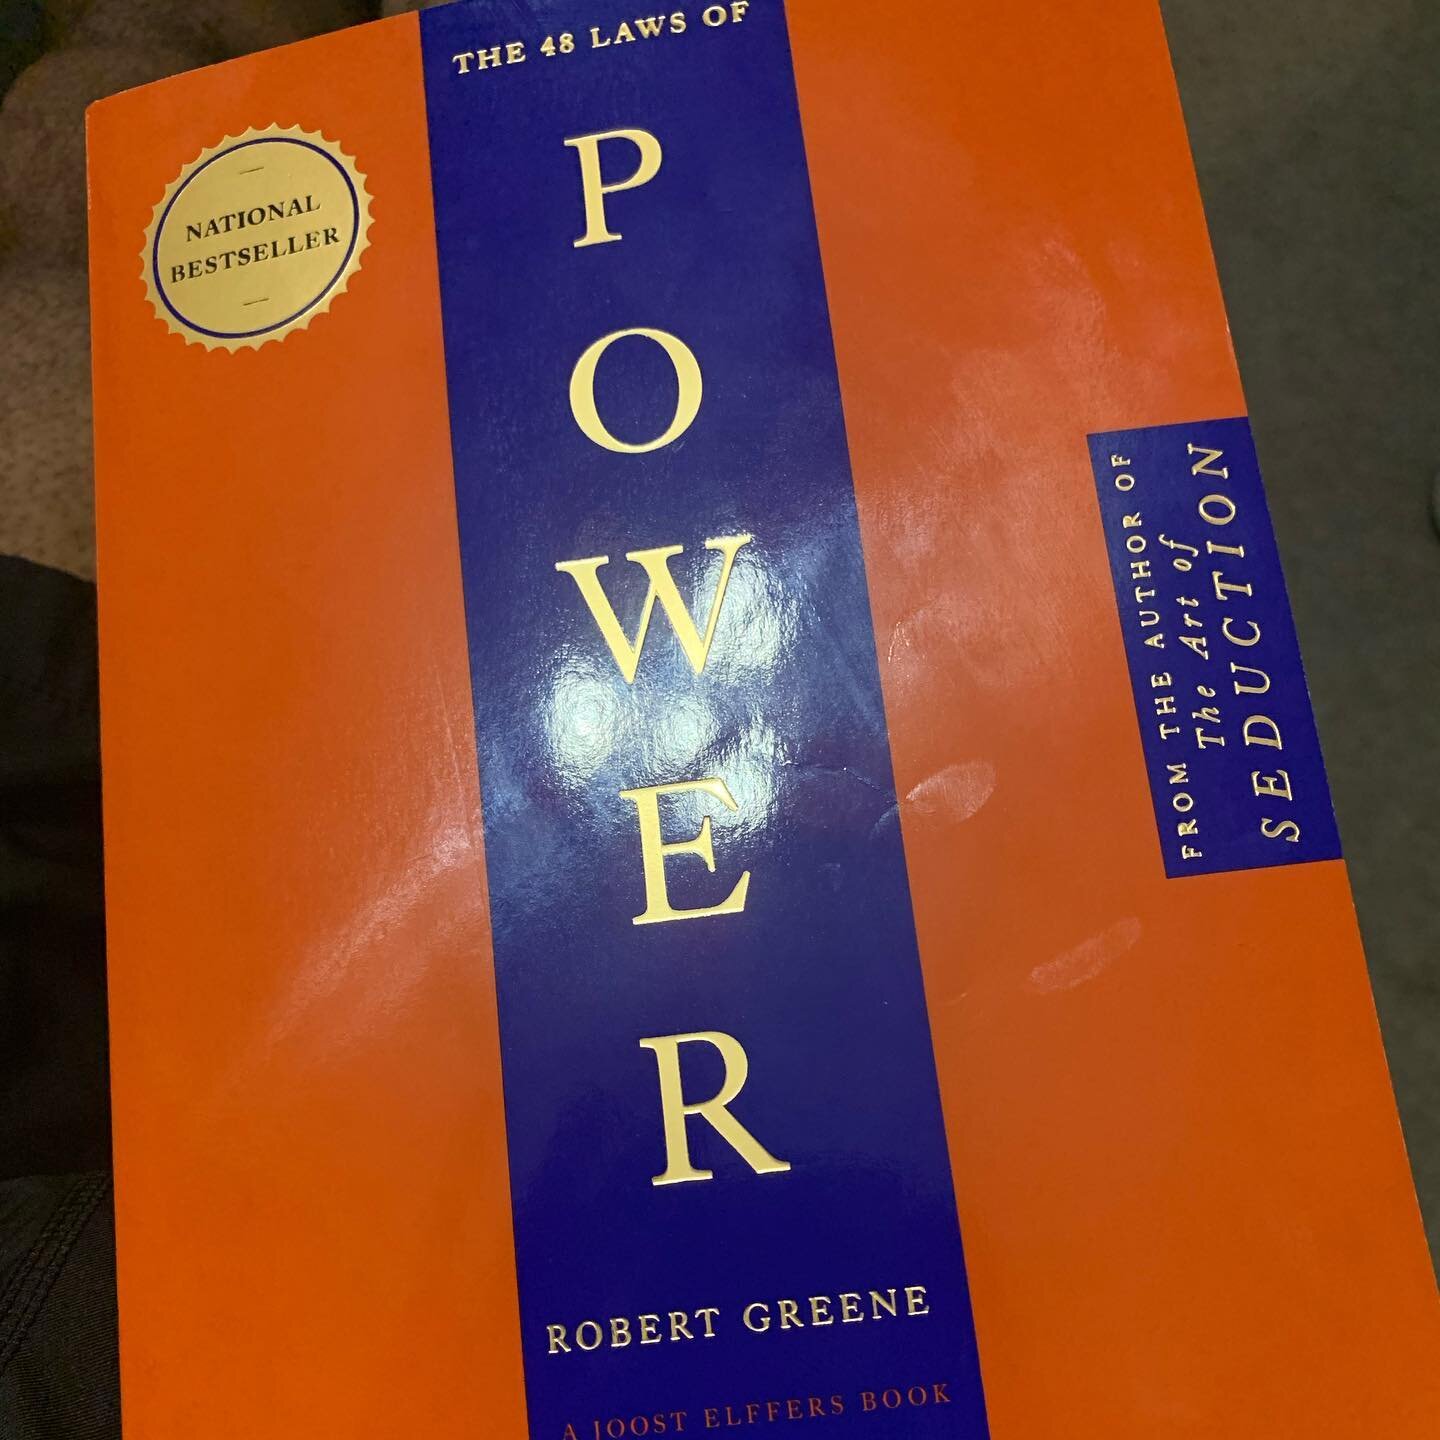 First up on @all_starsky #summerreadinglist #48LawsOfPower 

My 16 yo said he chose it partially bc he heard it was banned in prisons. Should I be afraid?

#power #parenting